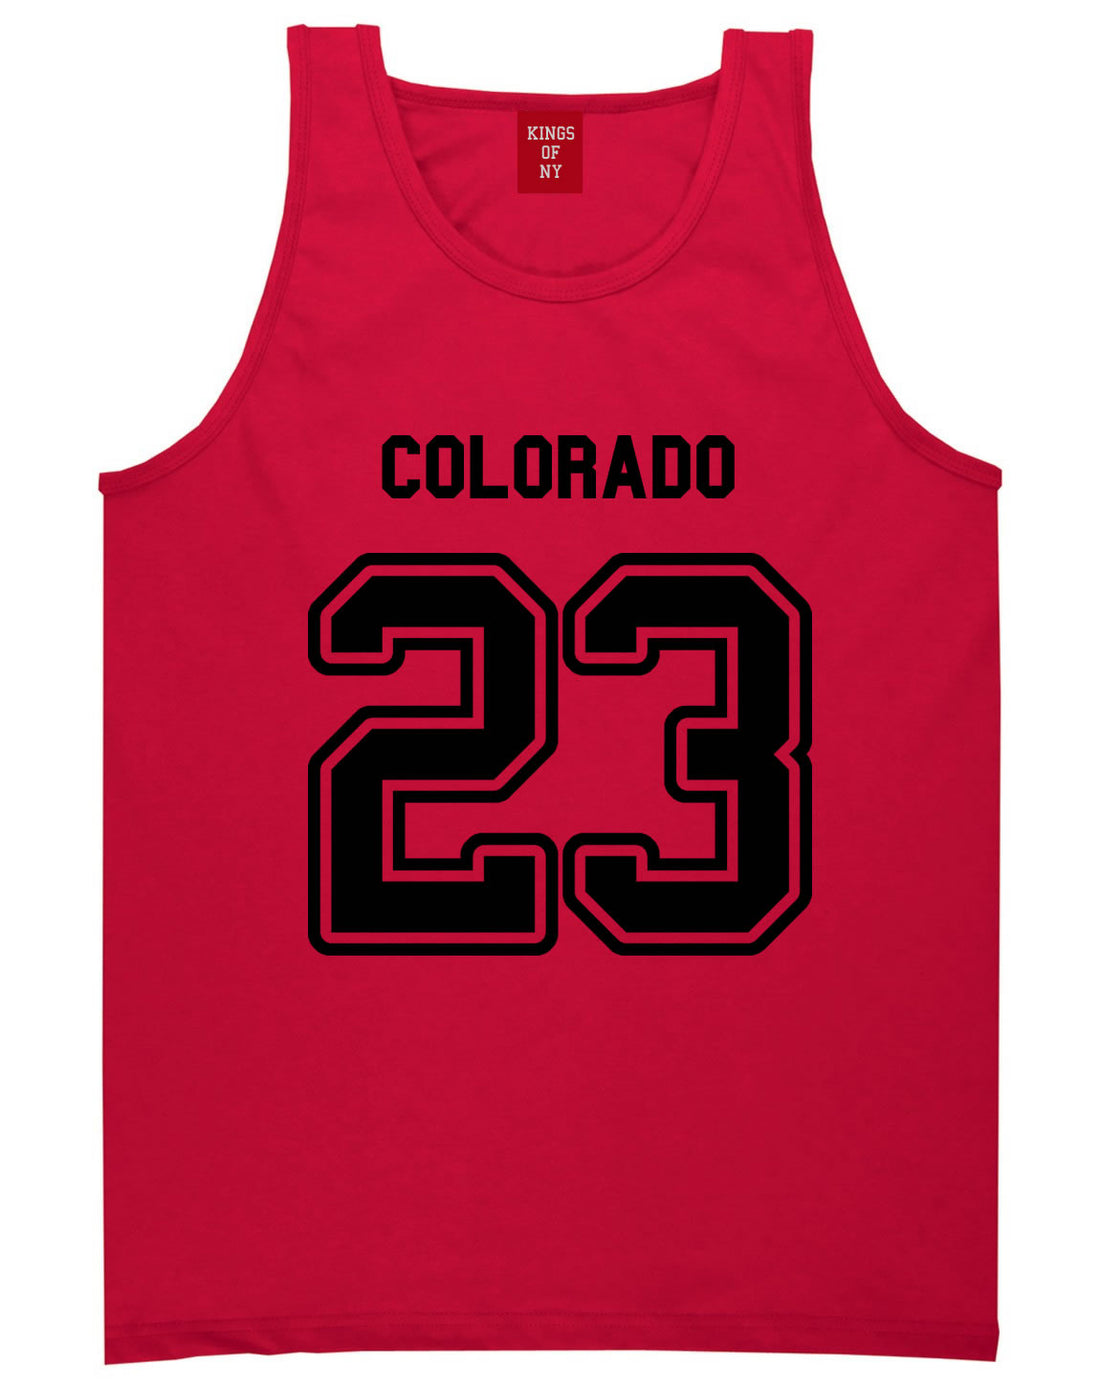 Sport Style Colorado 23 Team State Jersey Mens Tank Top By Kings Of NY